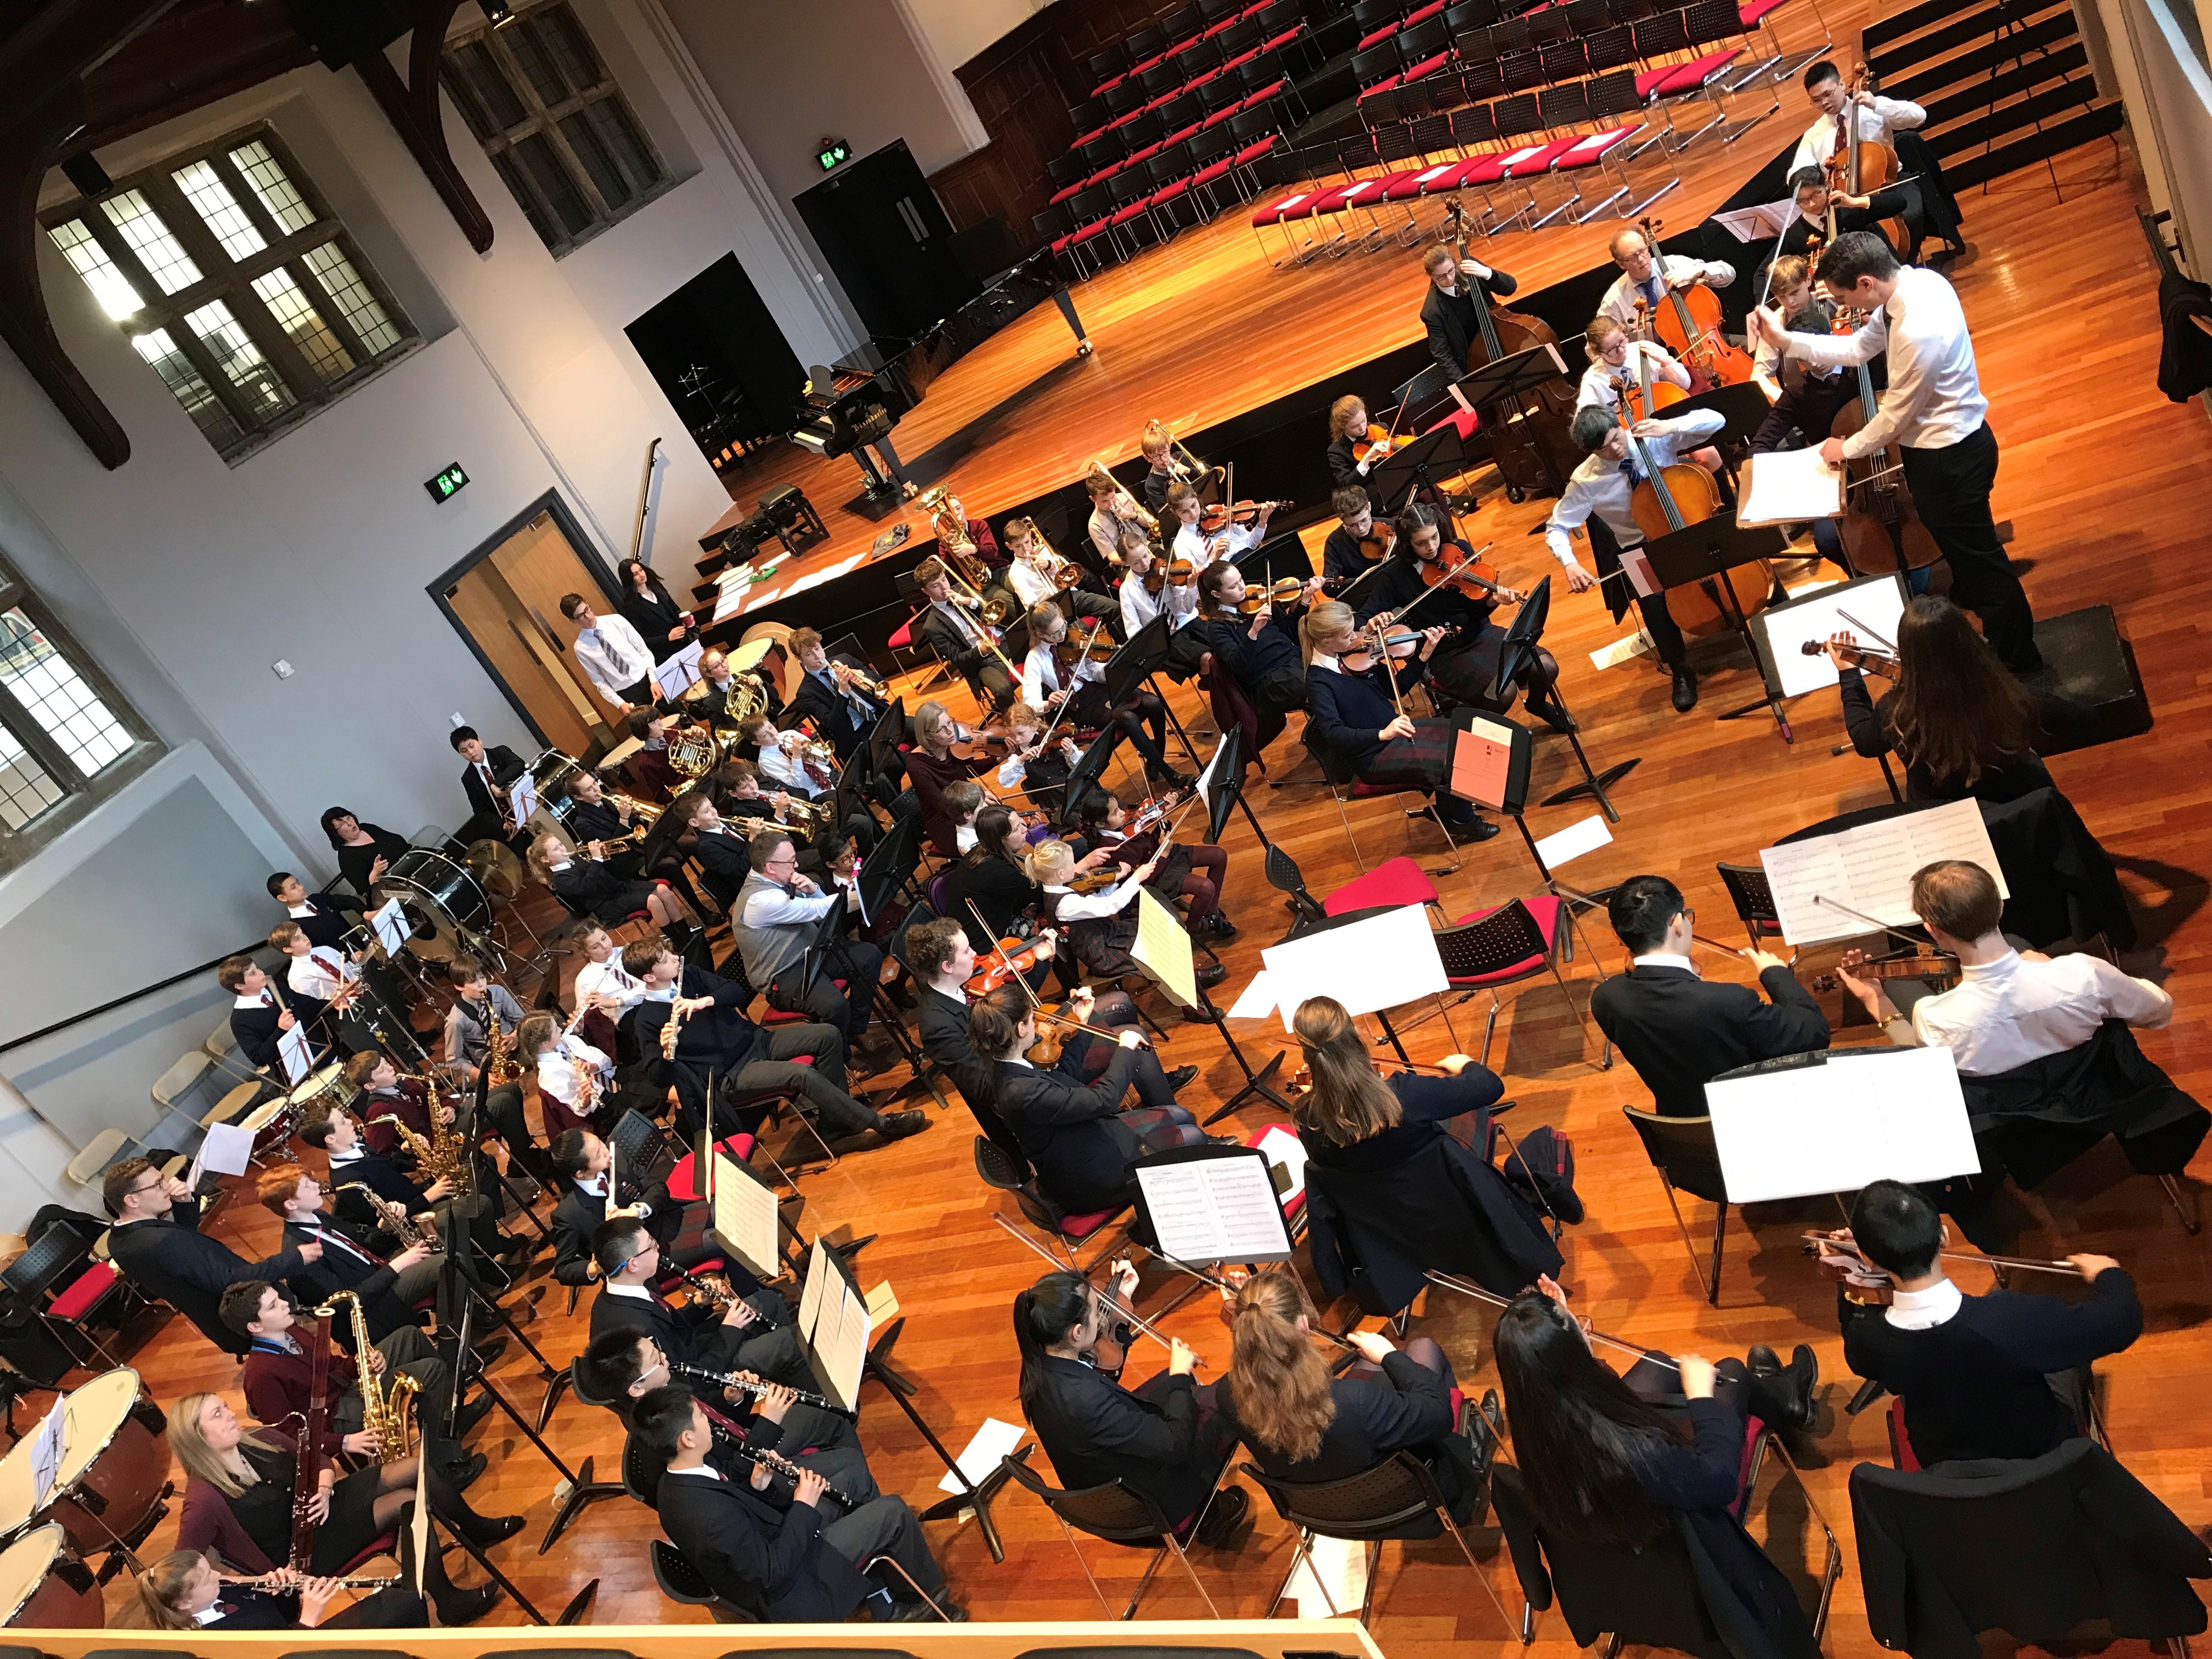 Orchestra in a Day - Workshop and Concert with Bromsgrove and Winterfold, February 2019